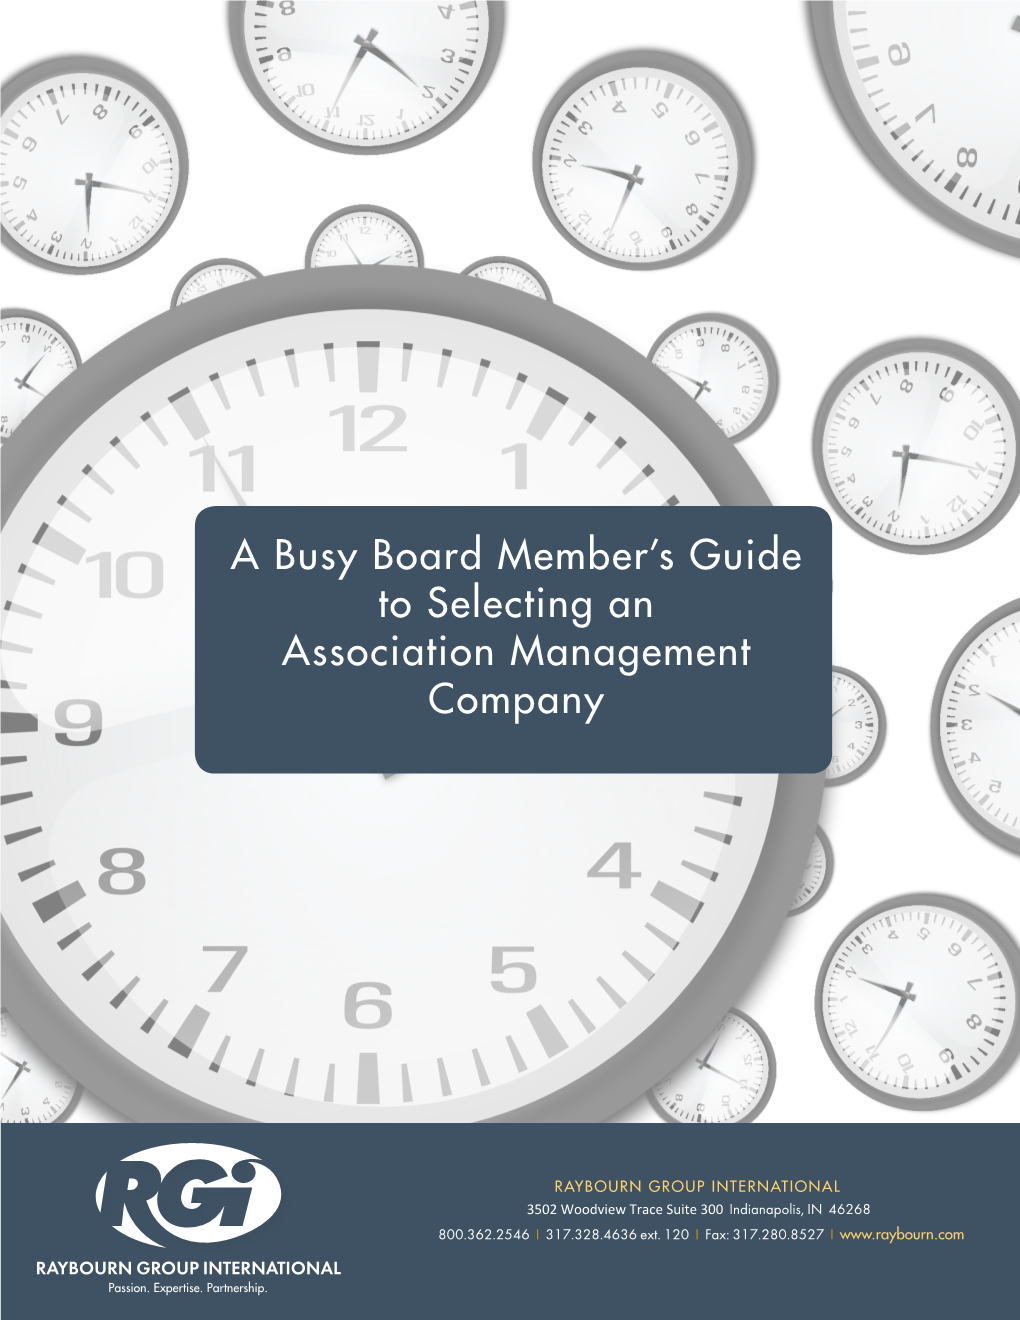 A Busy Board Member's Guide to Selecting an Association